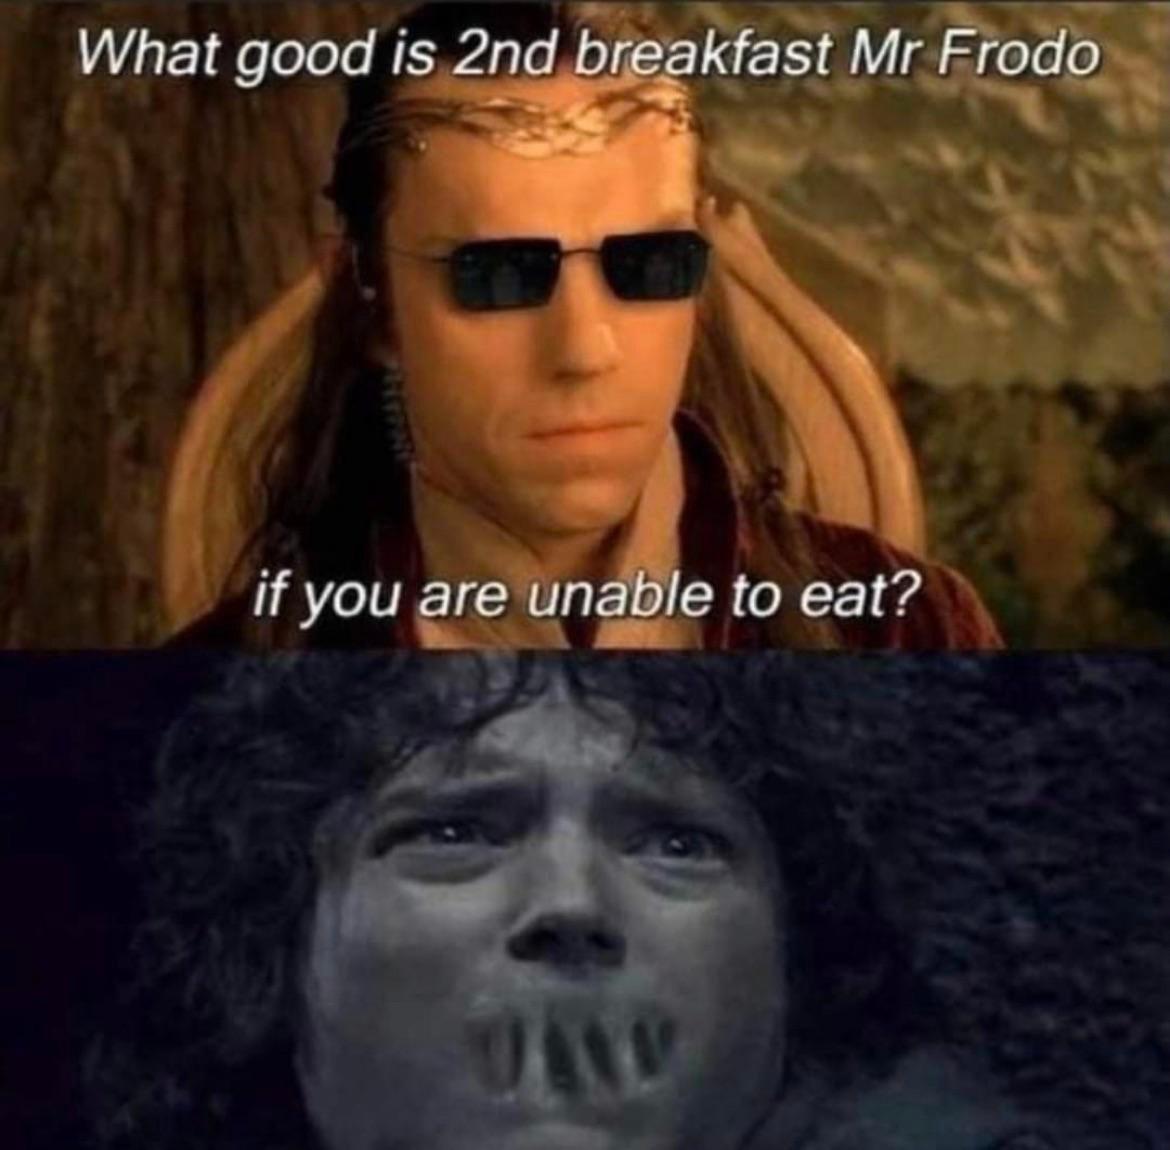 good is second breakfast mr frodo - What good is 2nd breakfast Mr Frodo if you are unable to eat?